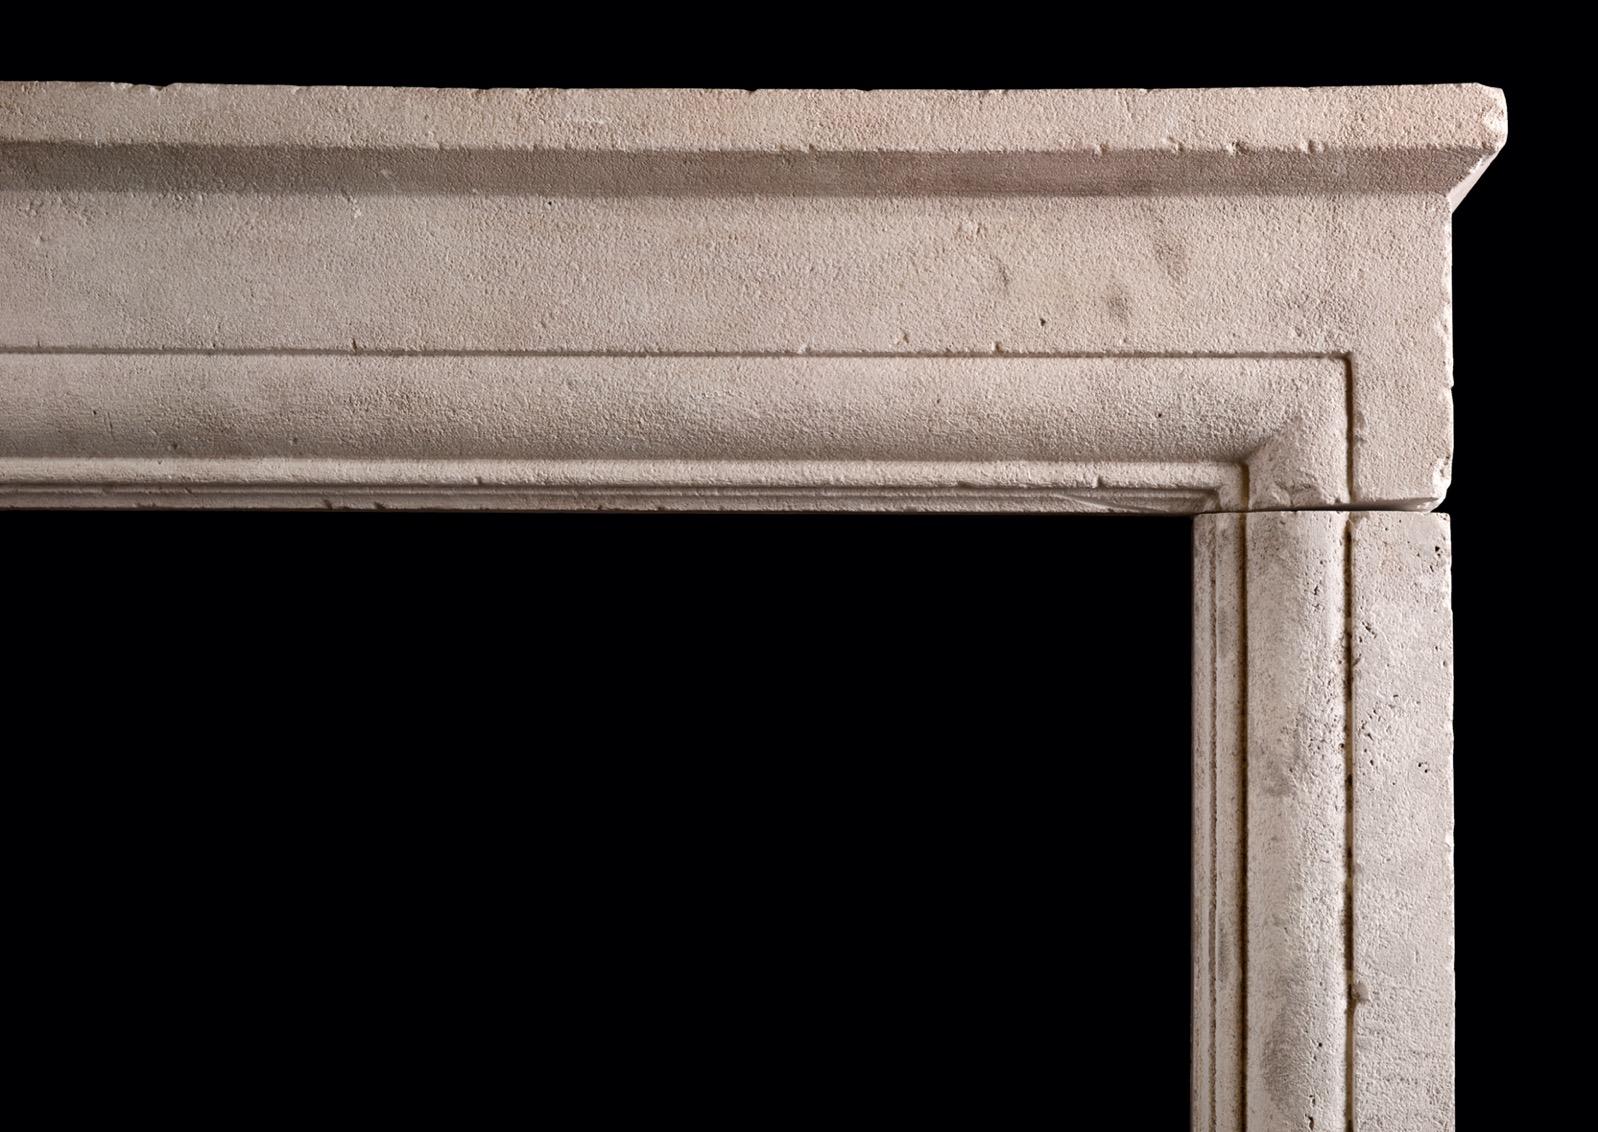 A rustic stone architectural English fireplace. The moulded jambs surmounted by matching frieze and shelf above. (In original rustic condition, but could be restored further upon request.) One of a pair available.

